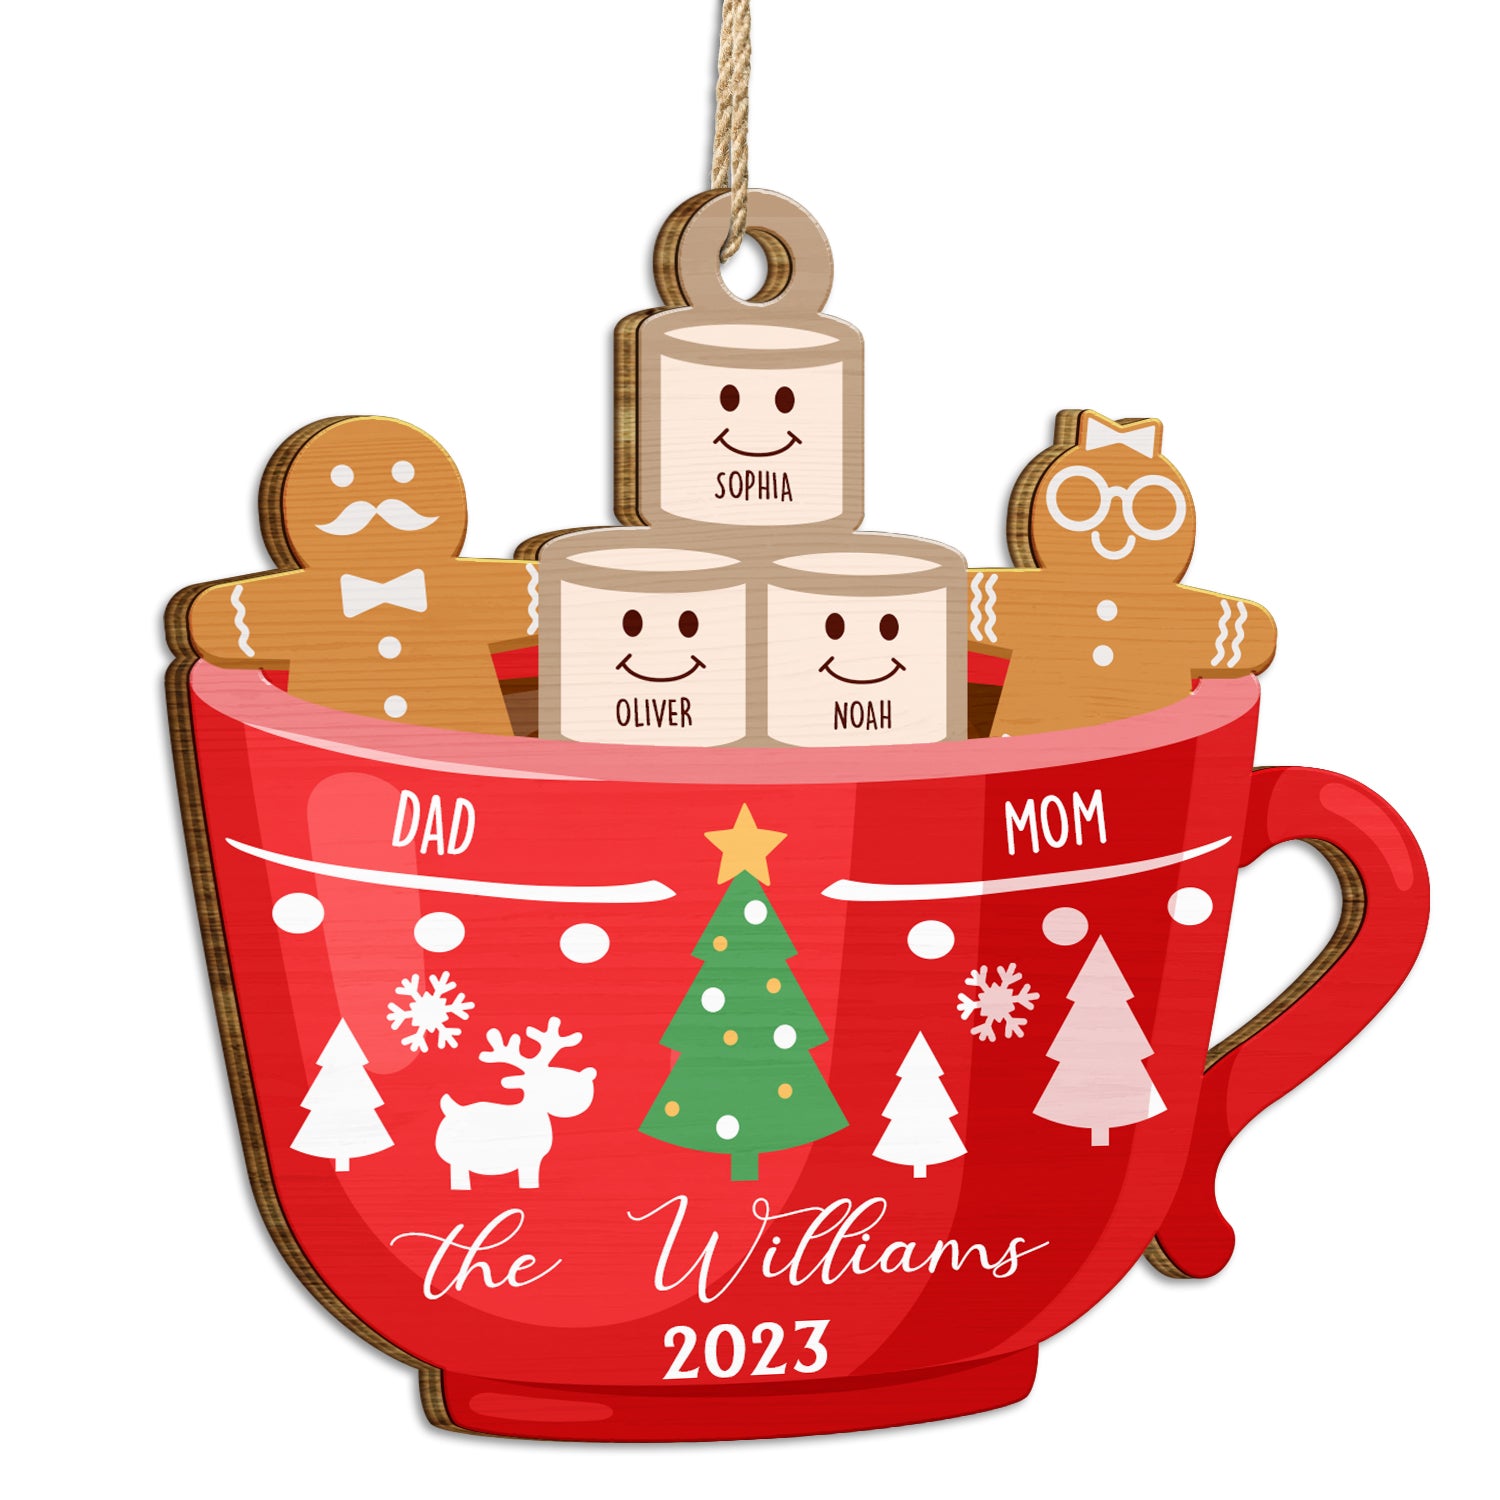 Marshmallow Gingerbread Man Hot Chocolate - Christmas, Lovely Gift For Parents, Grandparents - Personalized Wooden Cutout Ornament